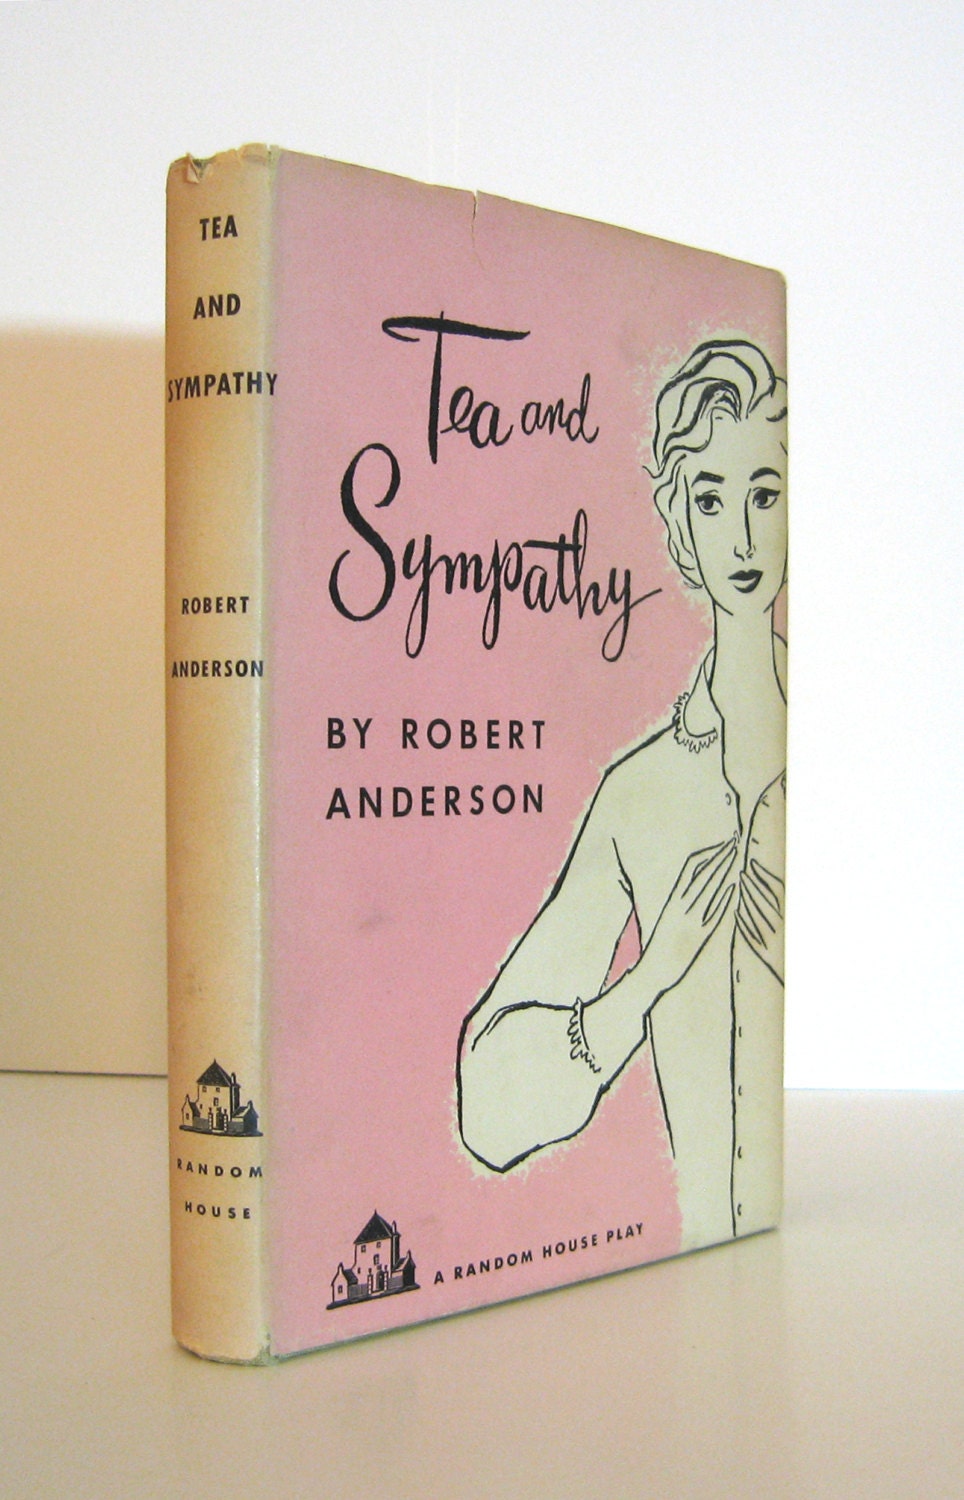 Tea and Sympathy a Play by Robert Anderson, Directed by Elia Kazan Starring Deborah Kerr Vintage Book Club Edition with Production Photos - ProfessorBooknoodle